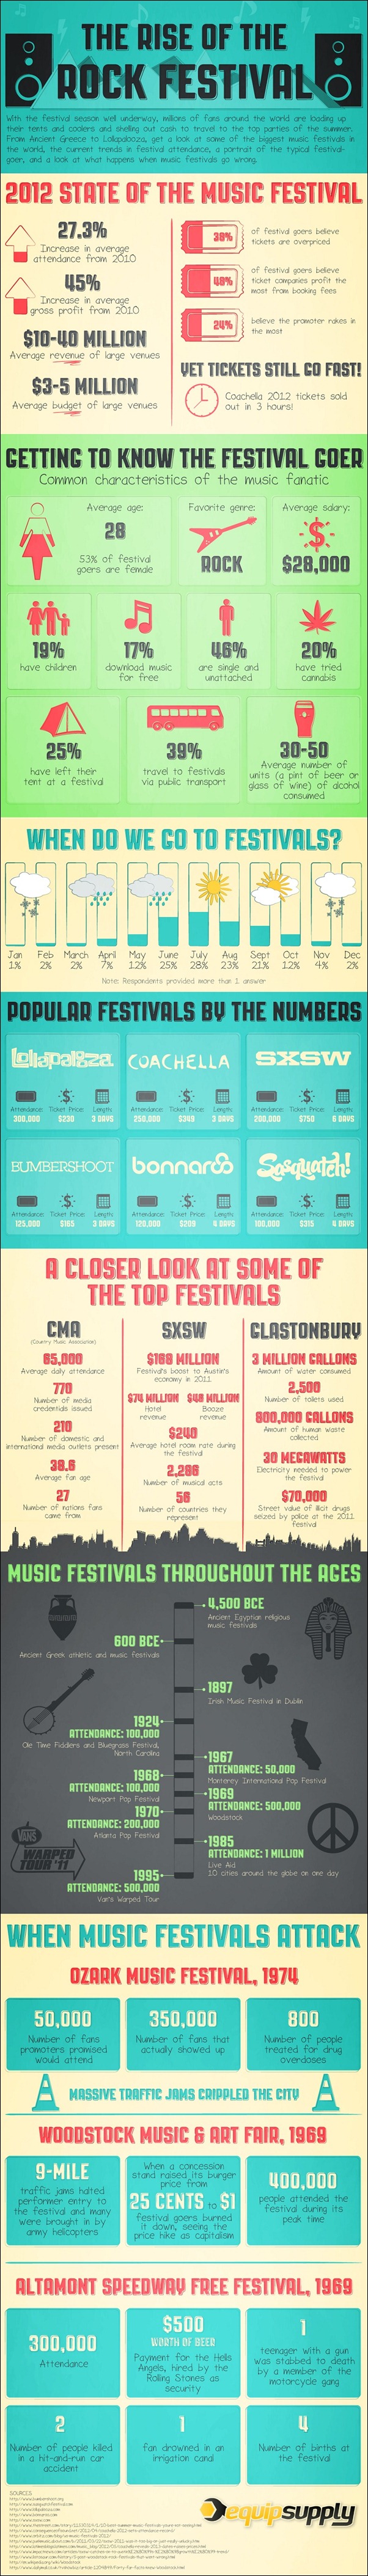 Music Festival Outlook-Infographic